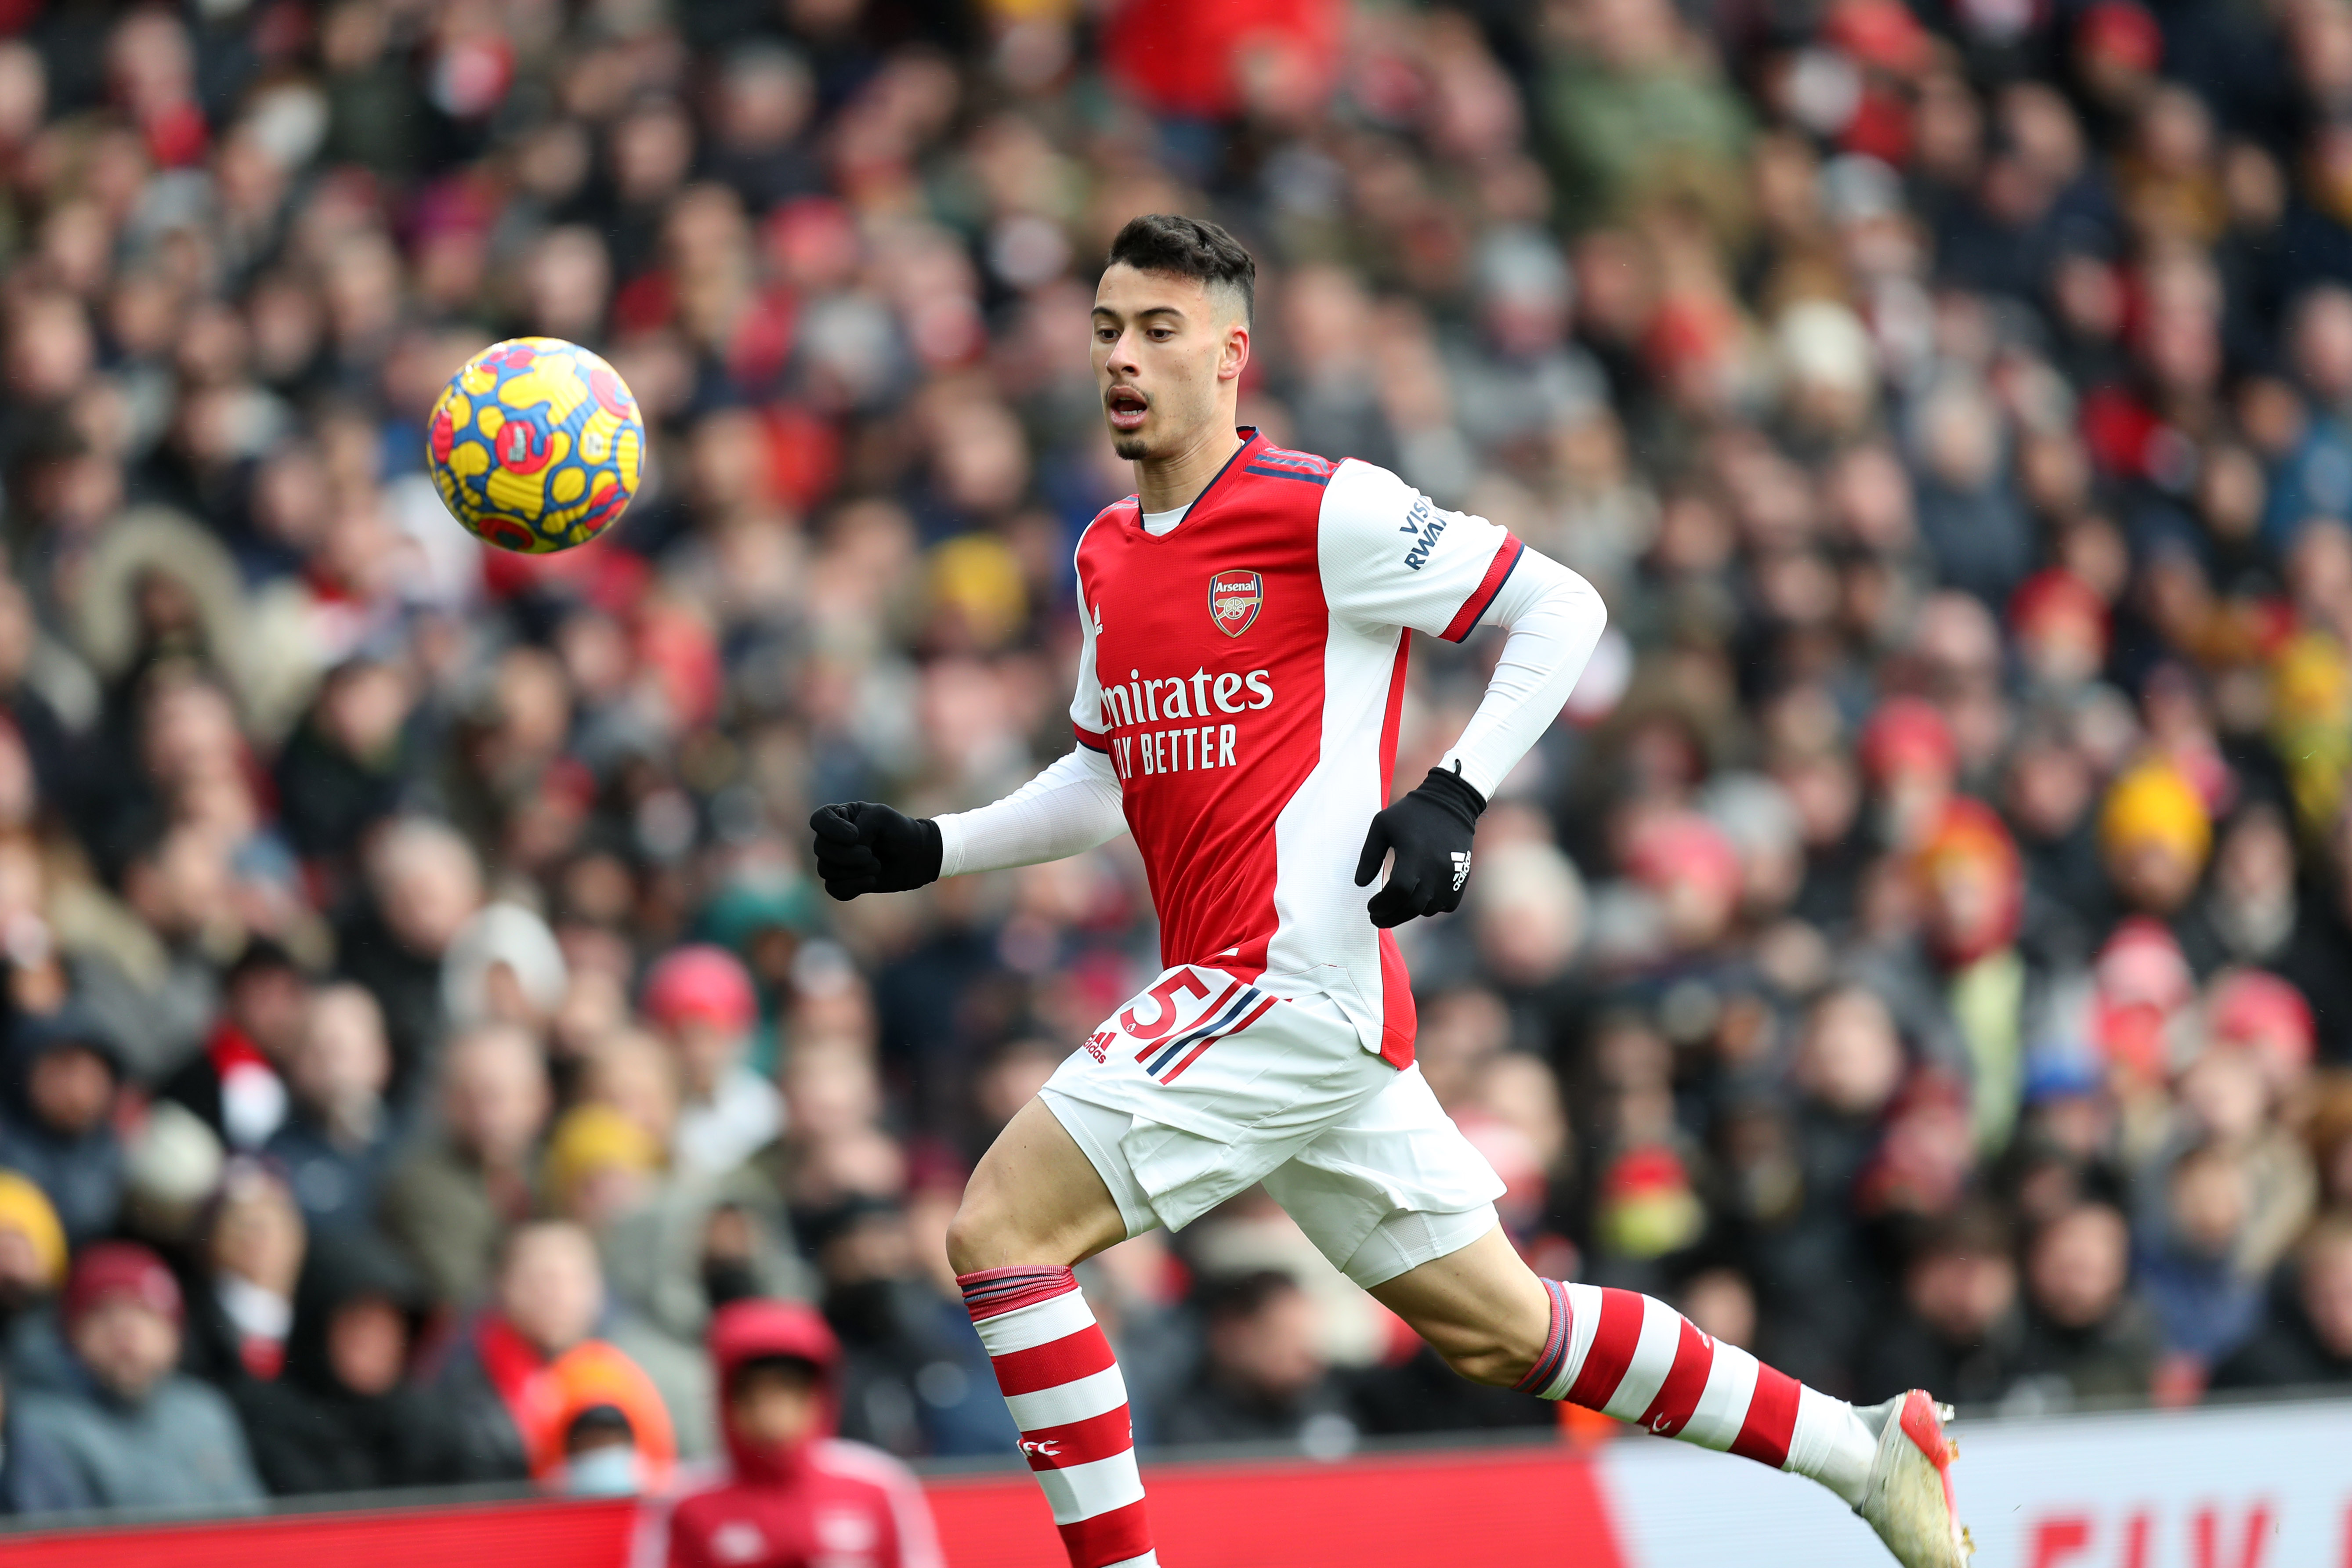 Loyal Gooner Lowell: Back to winning ways as Arsenal ease past Newcastle 